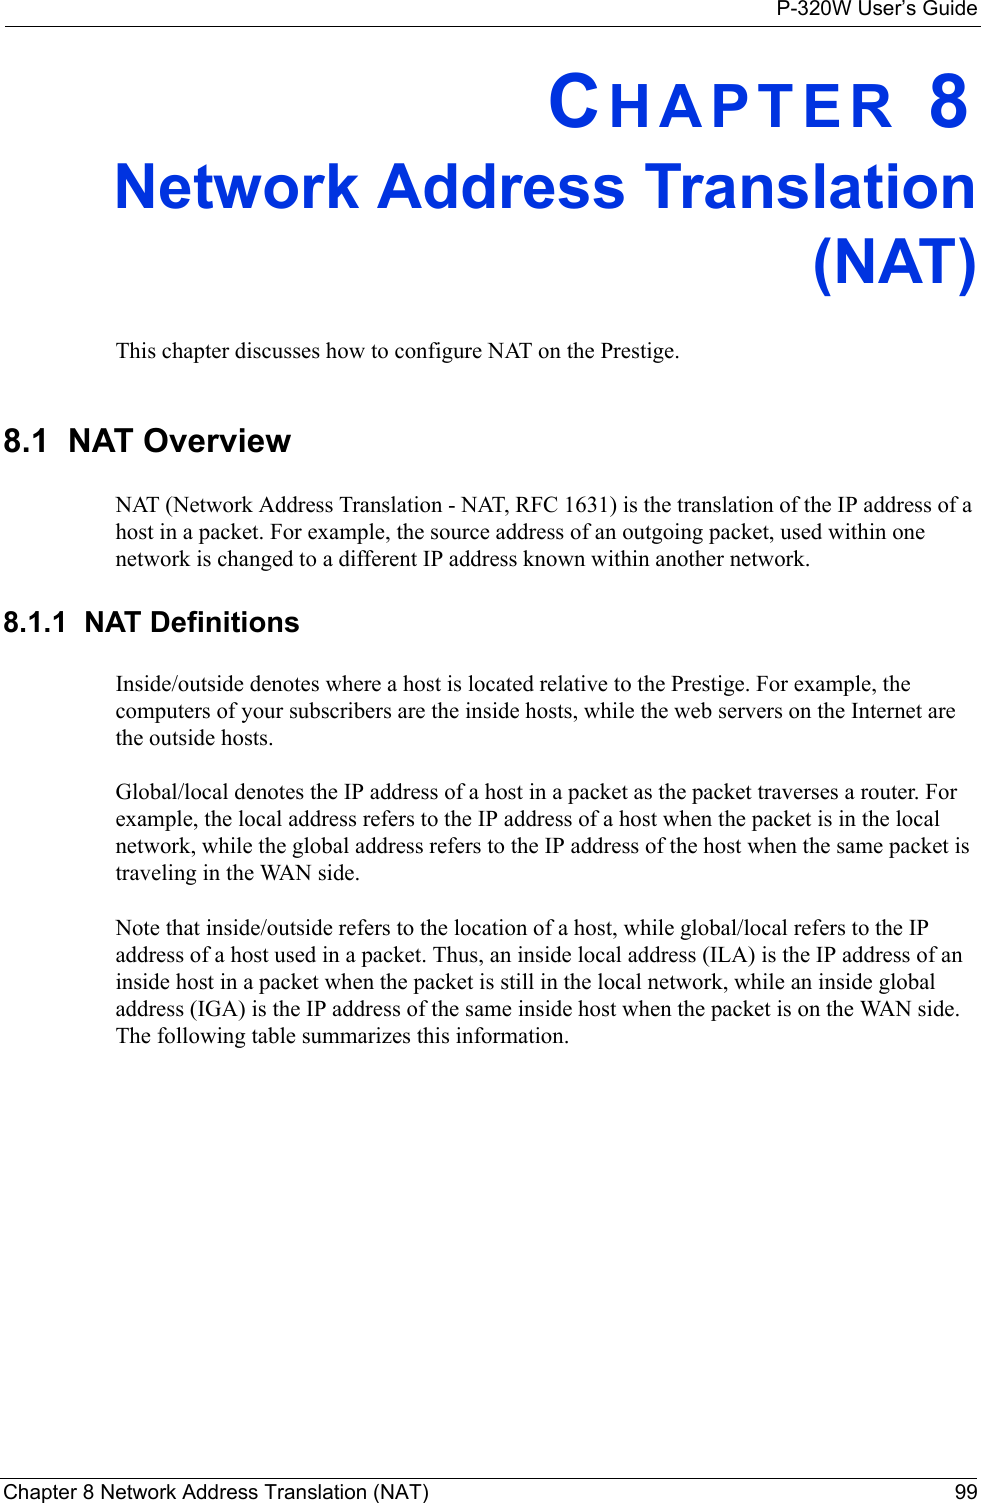 P-320W User’s GuideChapter 8 Network Address Translation (NAT) 99CHAPTER 8Network Address Translation (NAT) This chapter discusses how to configure NAT on the Prestige.8.1  NAT OverviewNAT (Network Address Translation - NAT, RFC 1631) is the translation of the IP address of a host in a packet. For example, the source address of an outgoing packet, used within one network is changed to a different IP address known within another network.8.1.1  NAT DefinitionsInside/outside denotes where a host is located relative to the Prestige. For example, the computers of your subscribers are the inside hosts, while the web servers on the Internet are the outside hosts. Global/local denotes the IP address of a host in a packet as the packet traverses a router. For example, the local address refers to the IP address of a host when the packet is in the local network, while the global address refers to the IP address of the host when the same packet is traveling in the WAN side. Note that inside/outside refers to the location of a host, while global/local refers to the IP address of a host used in a packet. Thus, an inside local address (ILA) is the IP address of an inside host in a packet when the packet is still in the local network, while an inside global address (IGA) is the IP address of the same inside host when the packet is on the WAN side. The following table summarizes this information.